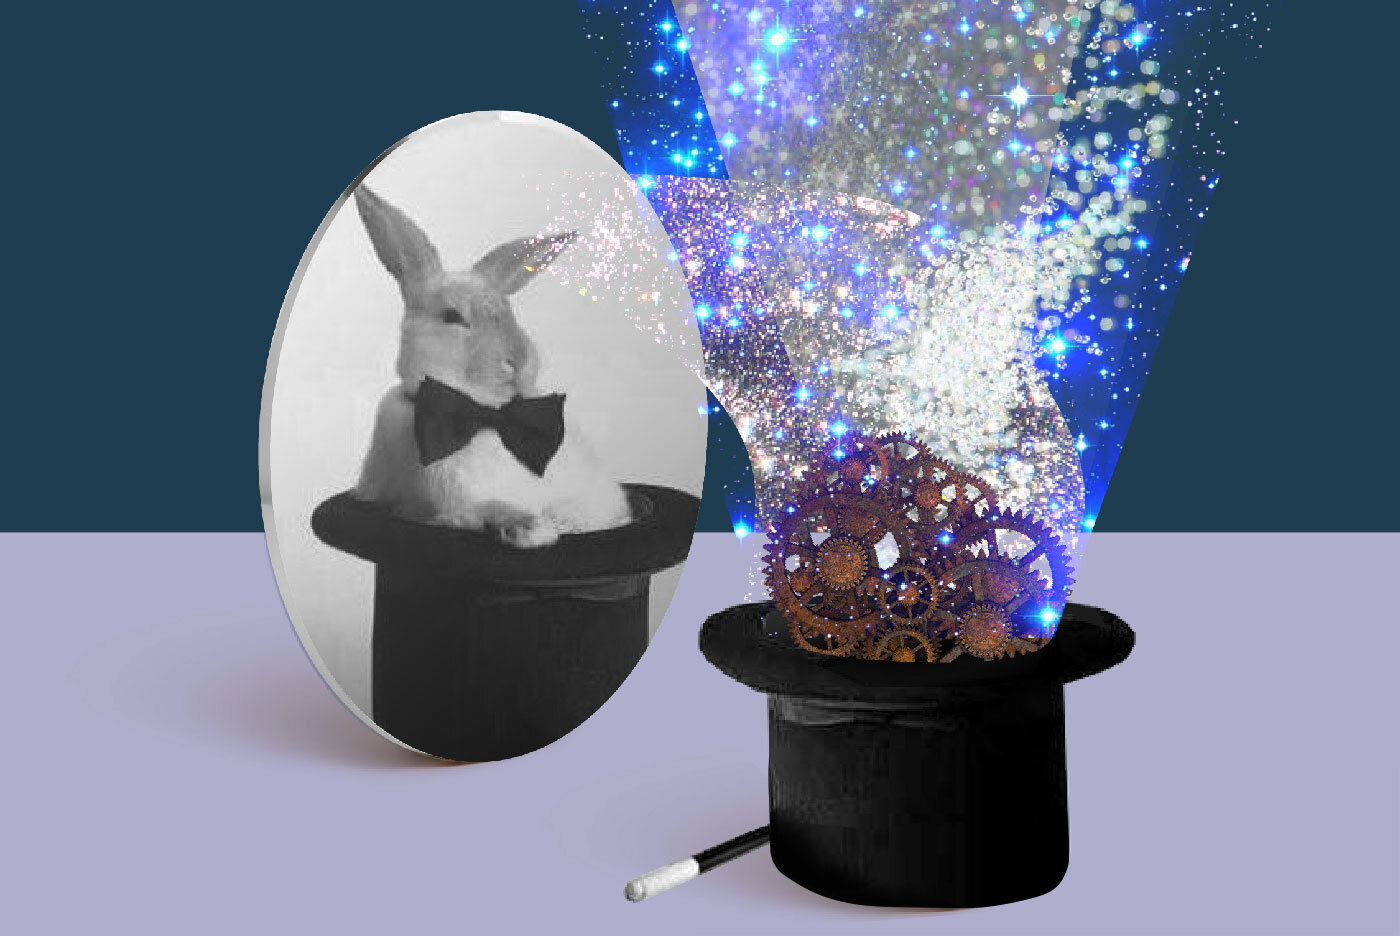 Illustration by Willow Berzin of a top hat with cogs and sparkles coming out of it. A magic wand lays beside it. The hat is reflected in a mirror but the reflection shows a rabbit wearing a bowtie where the cogs and sparkles were.